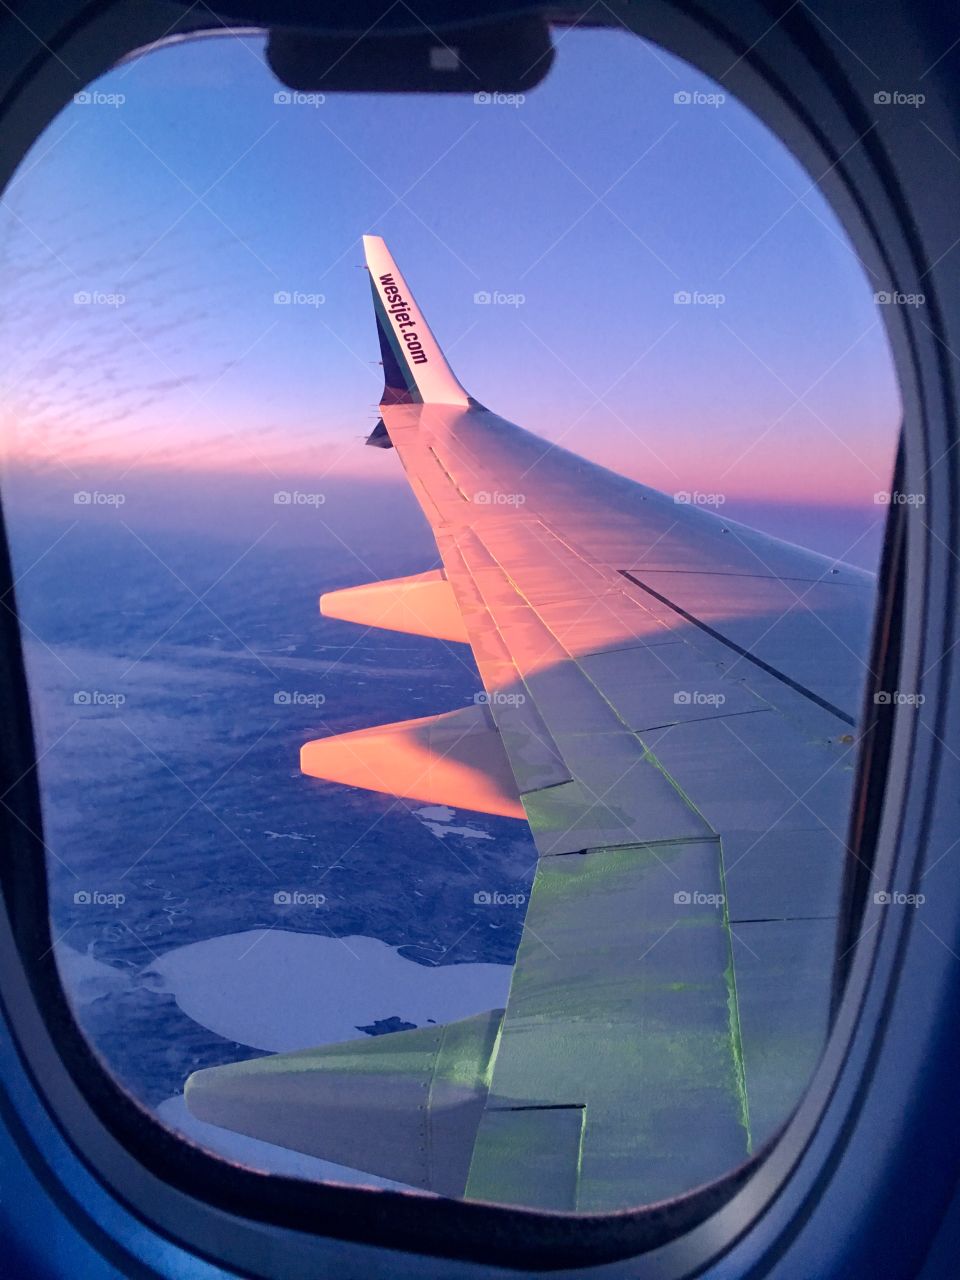 Sunset from a plane window!